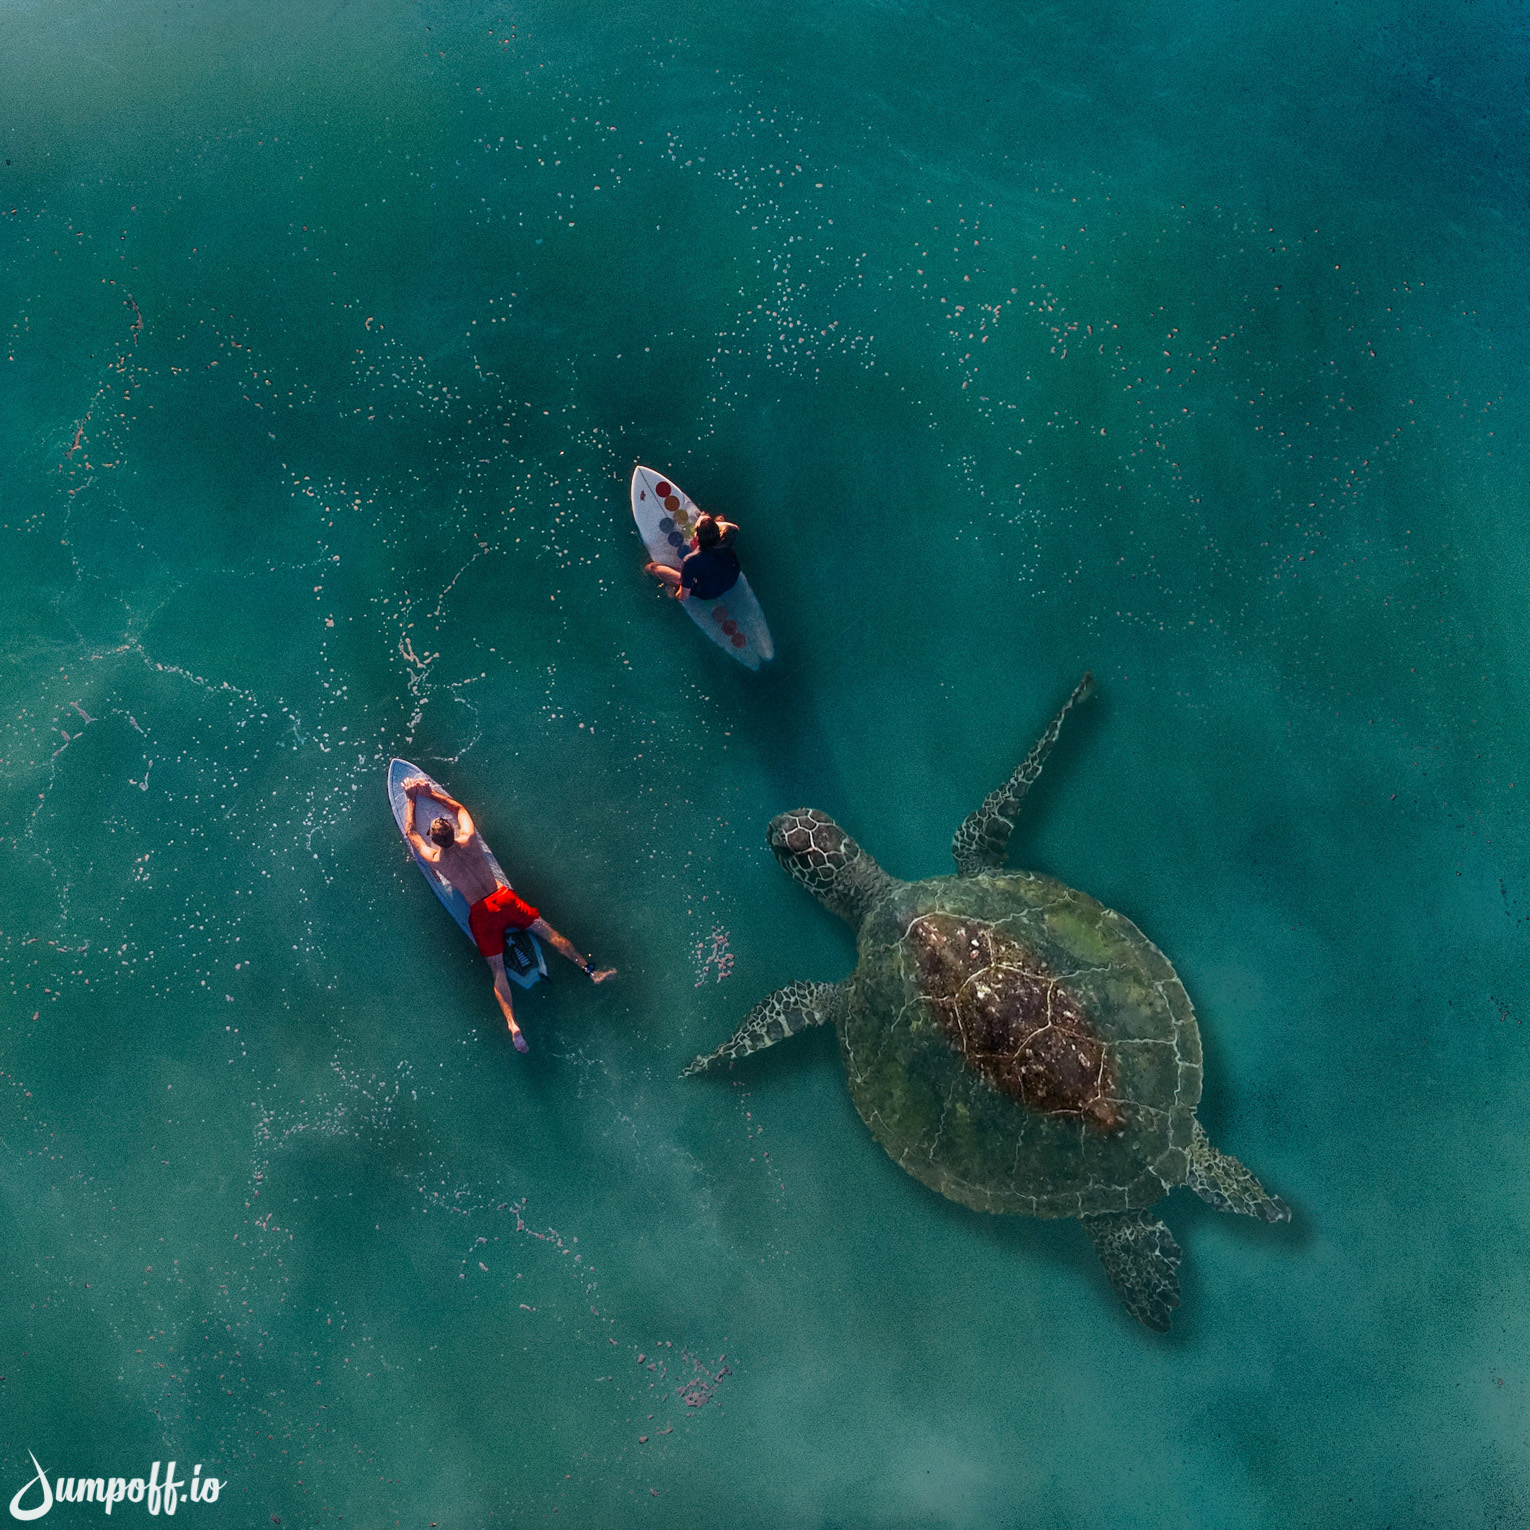 Giant Honu with surfers